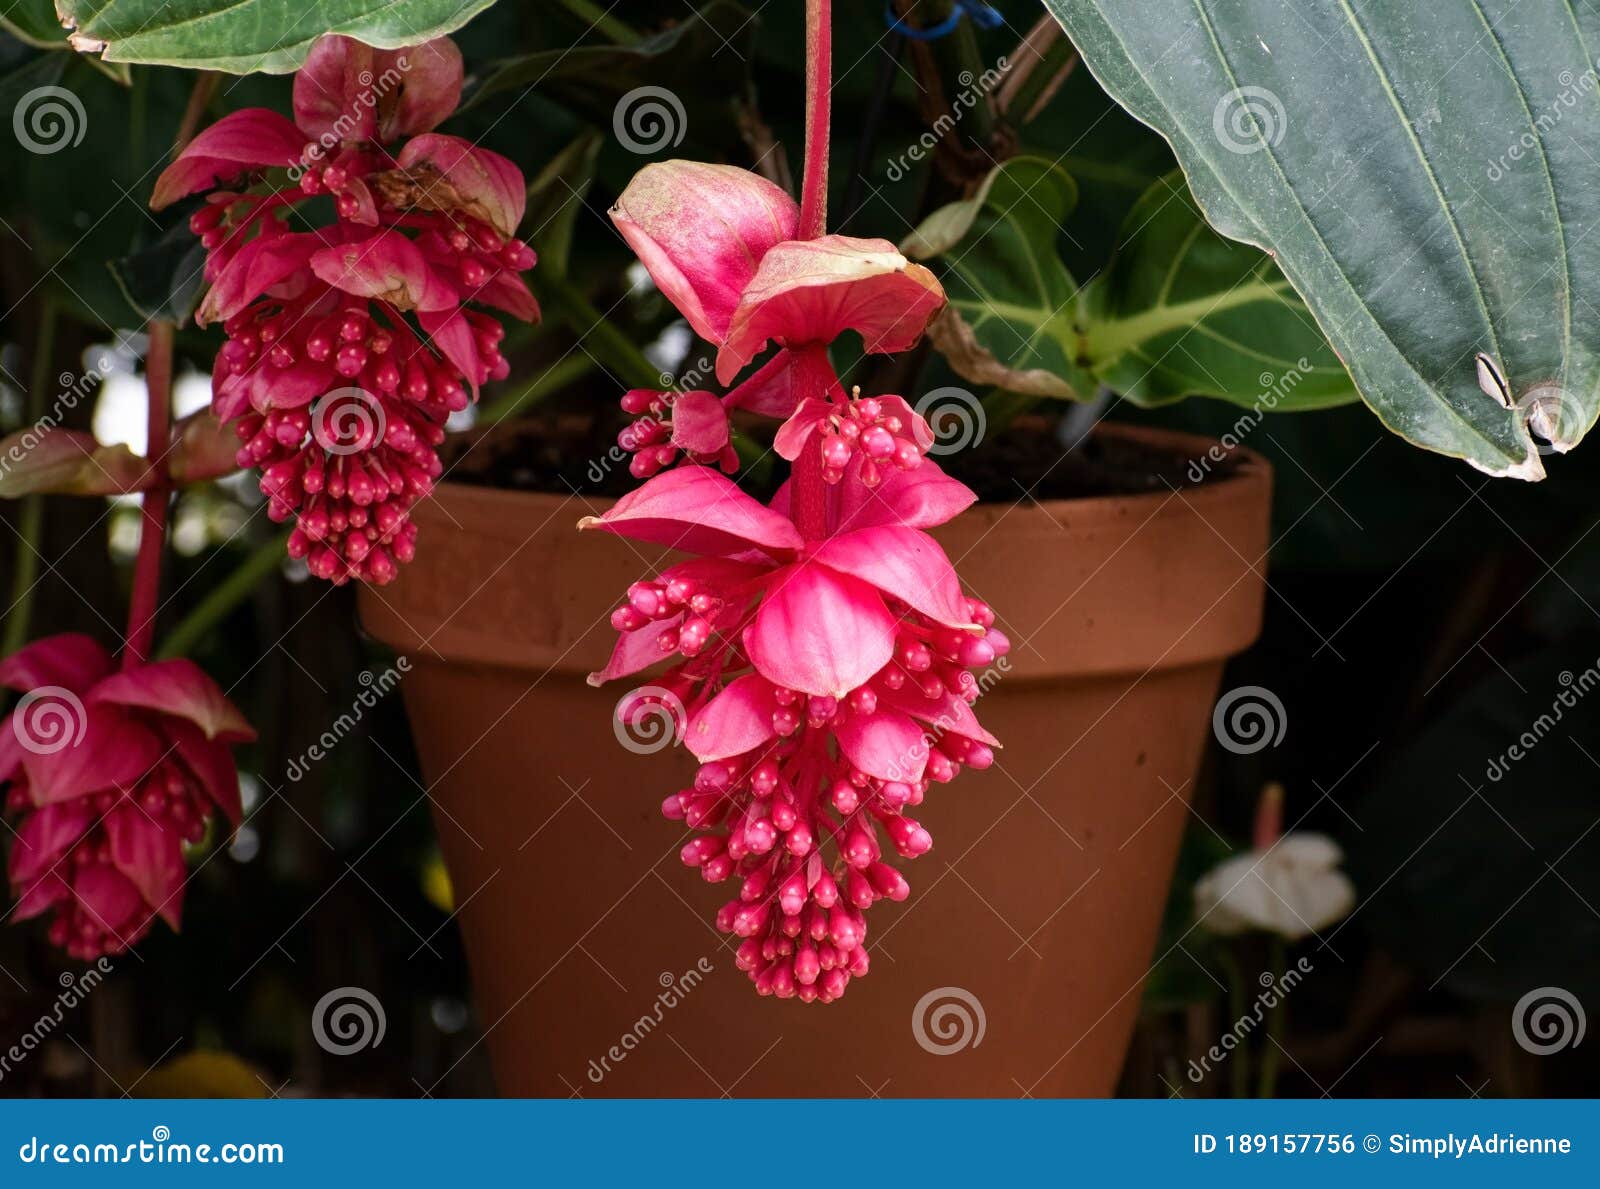 red, open showy medinilla magnifica flower with blurred pot and garden